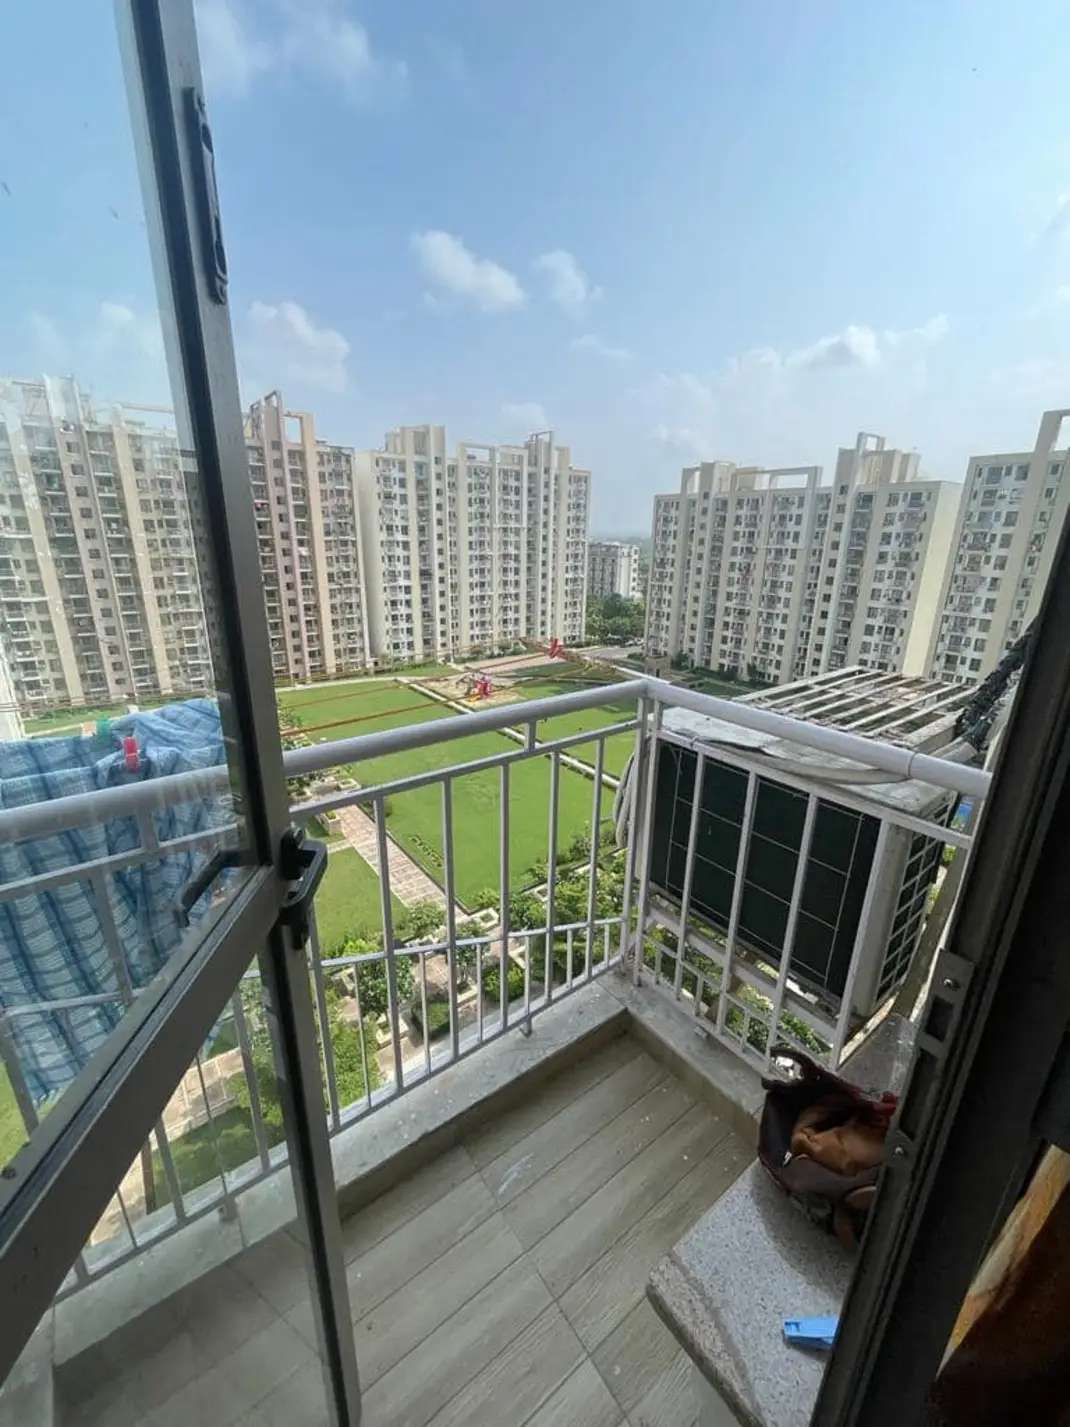 4 Bed/ 4 Bath Rent Apartment/ Flat, Furnished for rent @Sector 33 Gurugram 